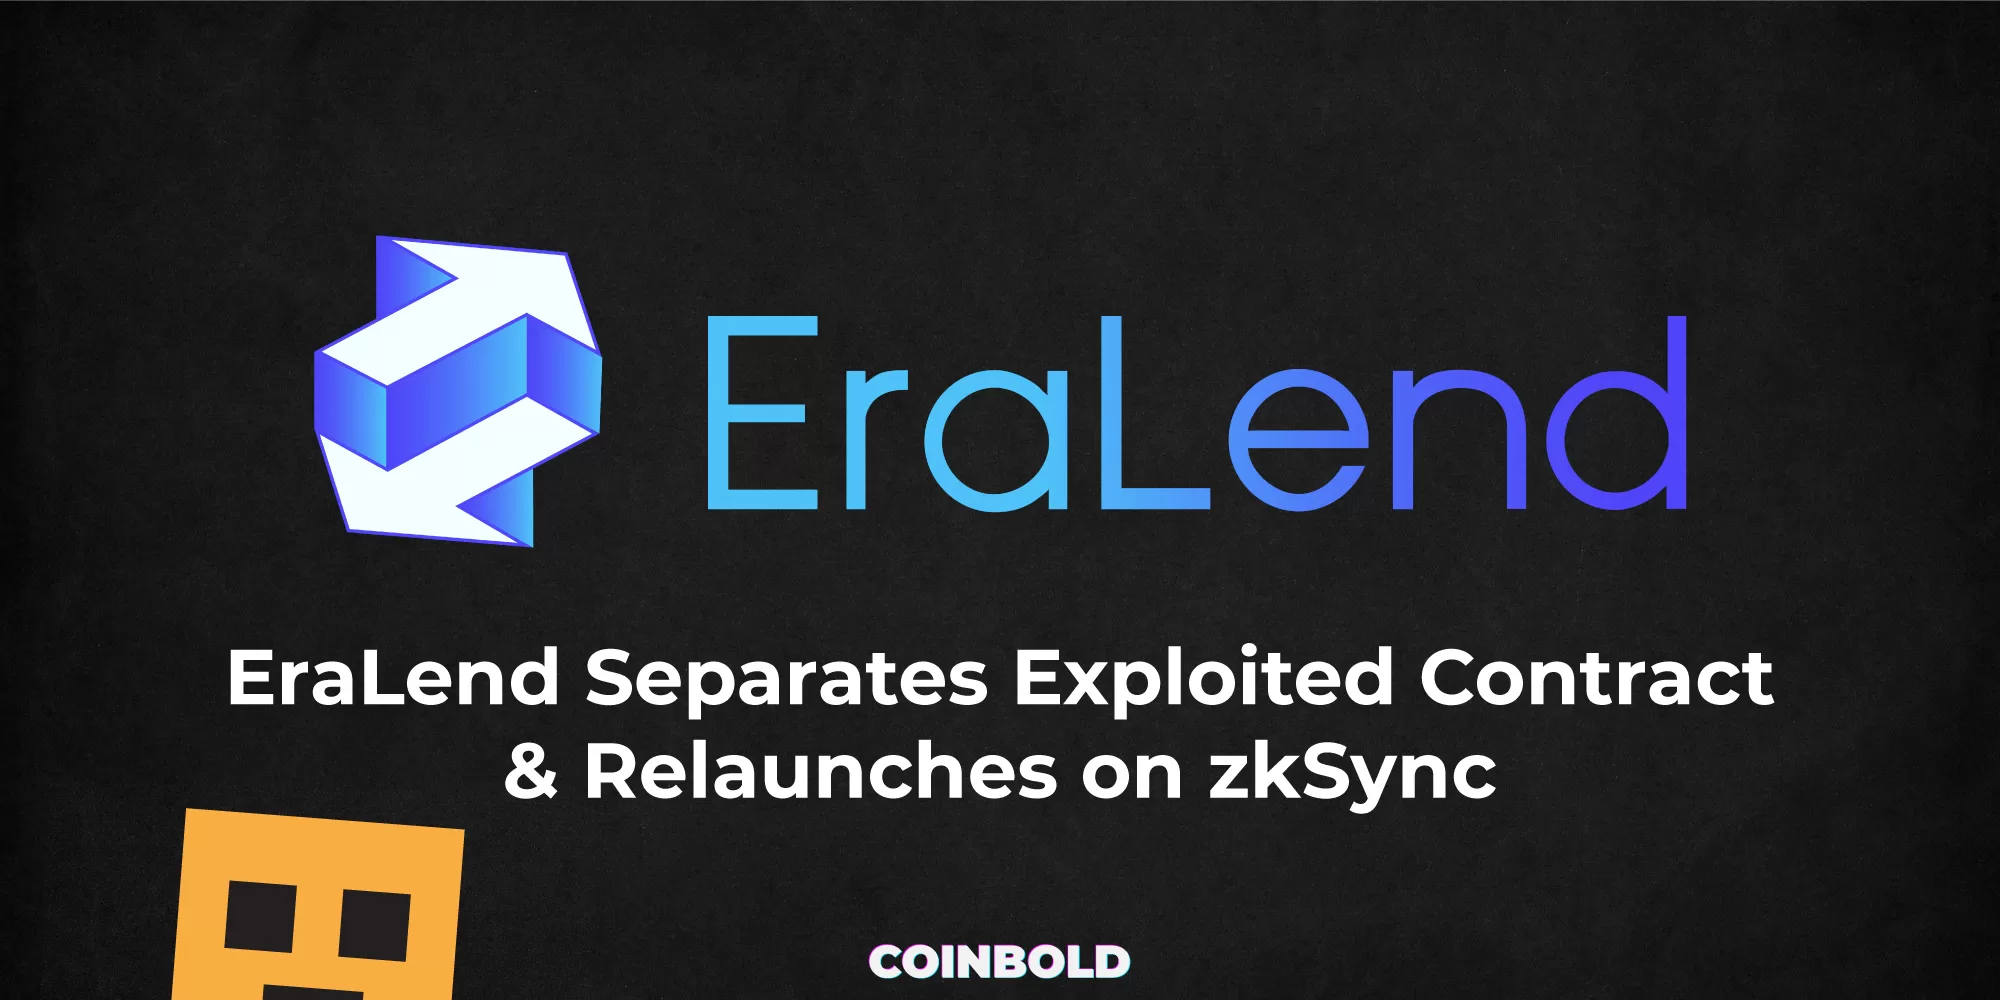 EraLend Separates Exploited Contract & Relaunches on zkSync